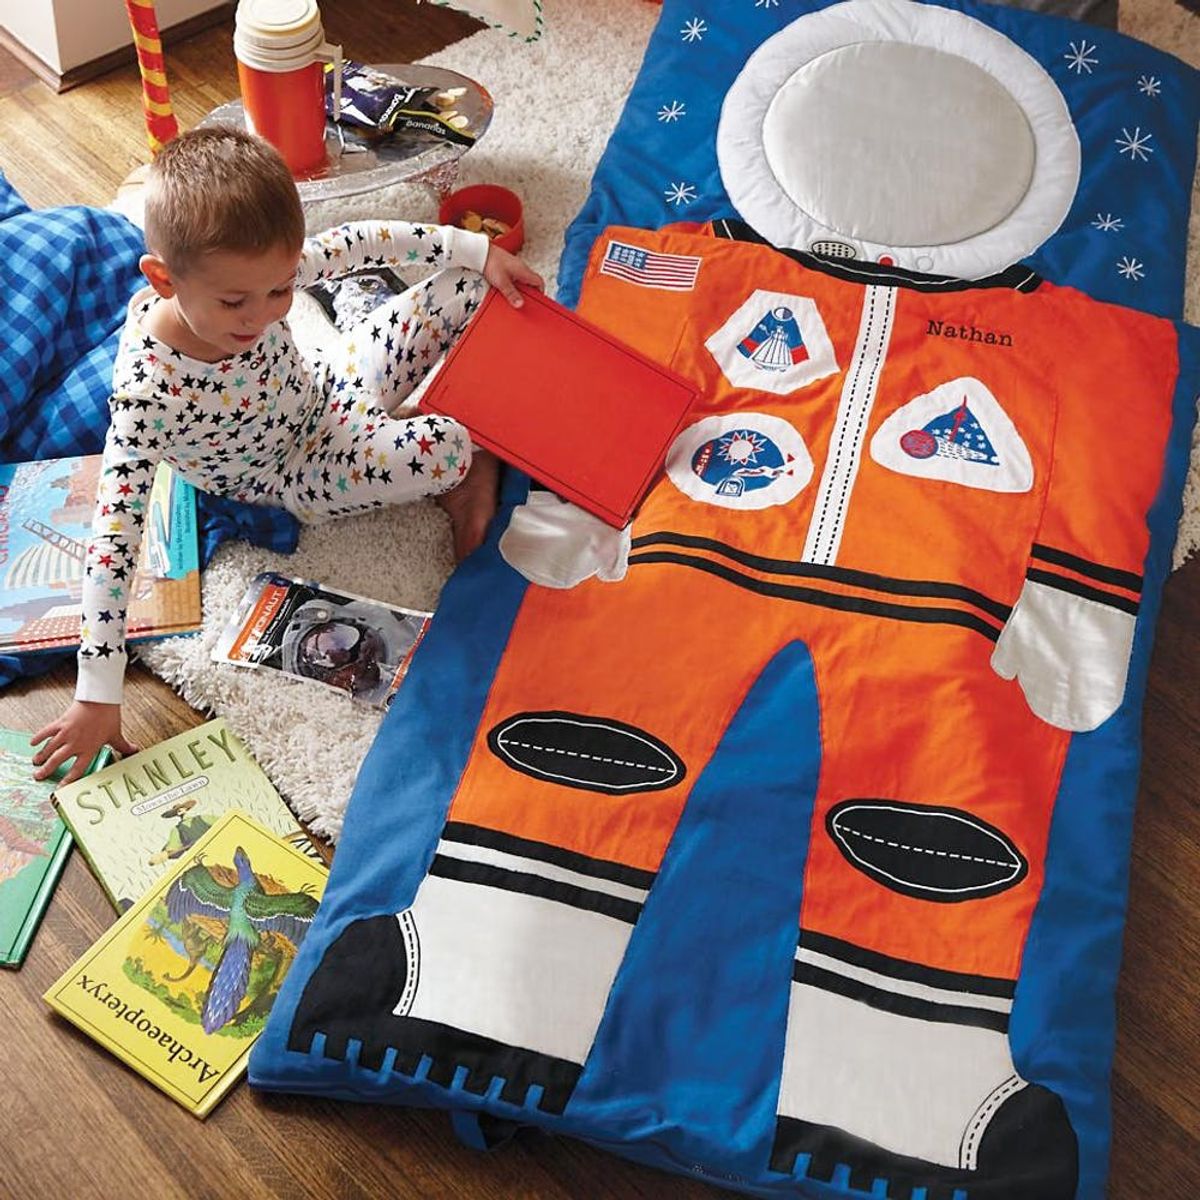 12 Personalized Gifts Any Kid Will Be Crazy About